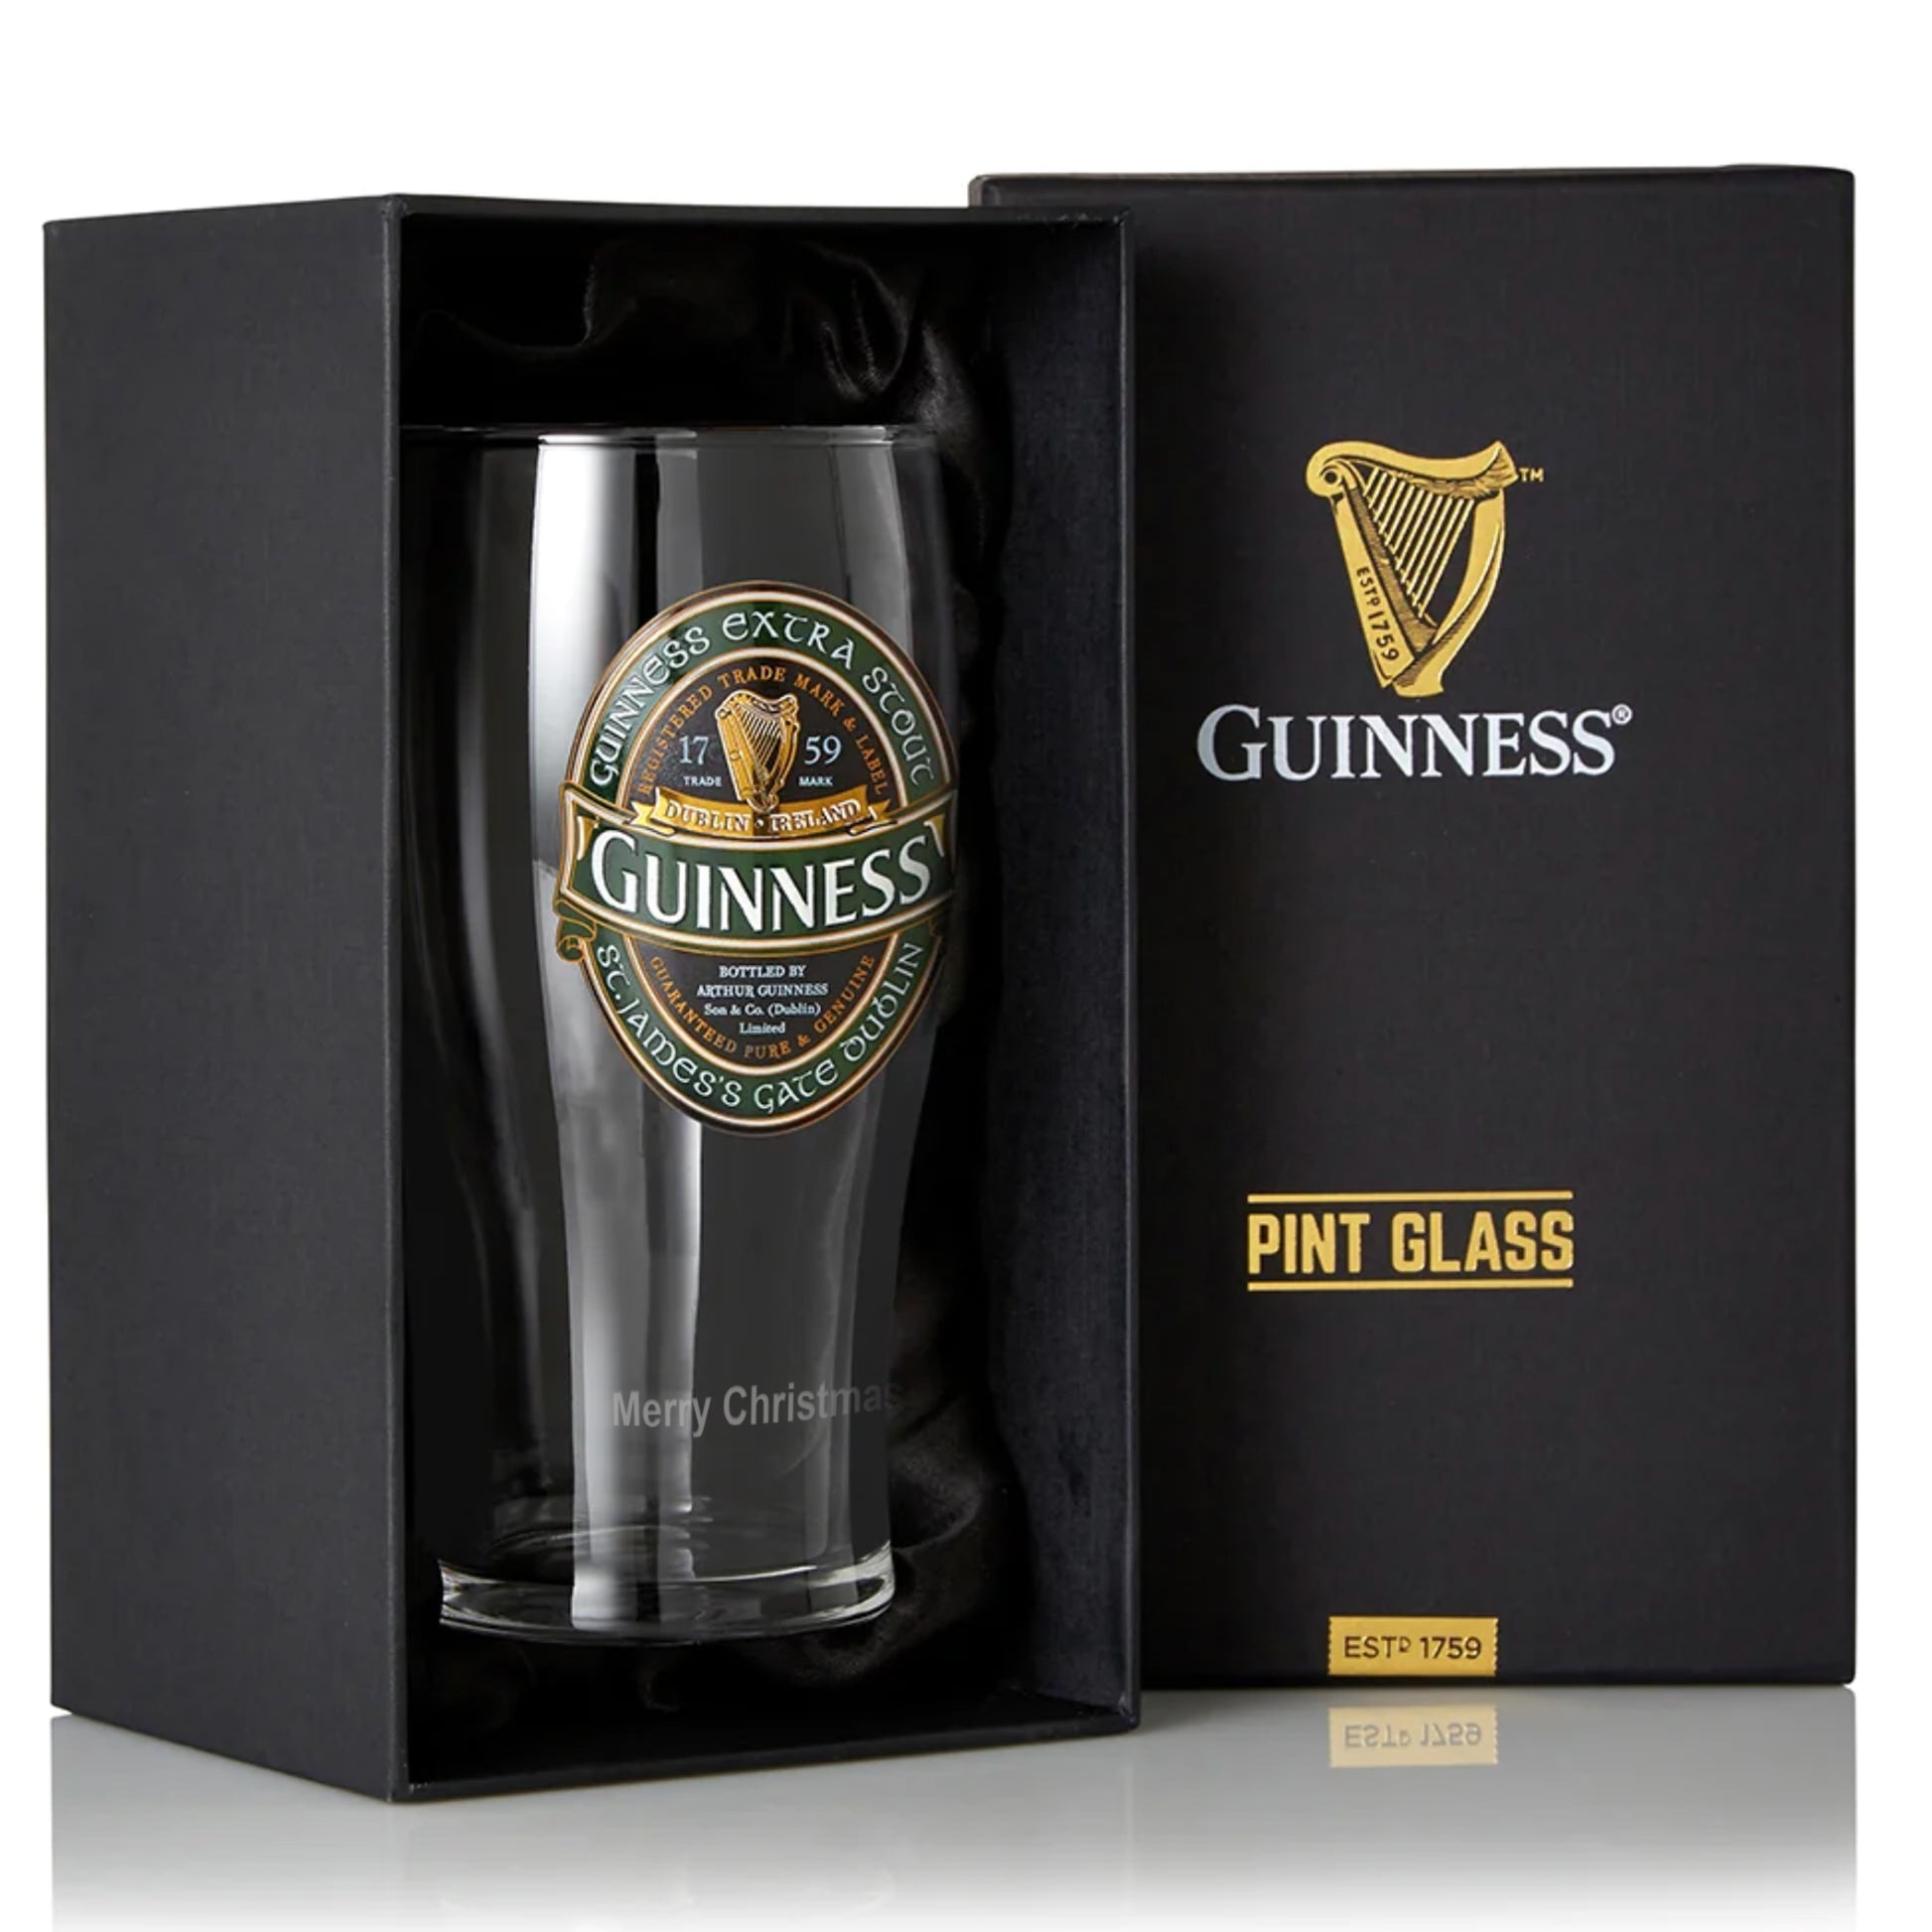 Authentic Guinness Ireland Collection Pint Glass in a commemorative box.